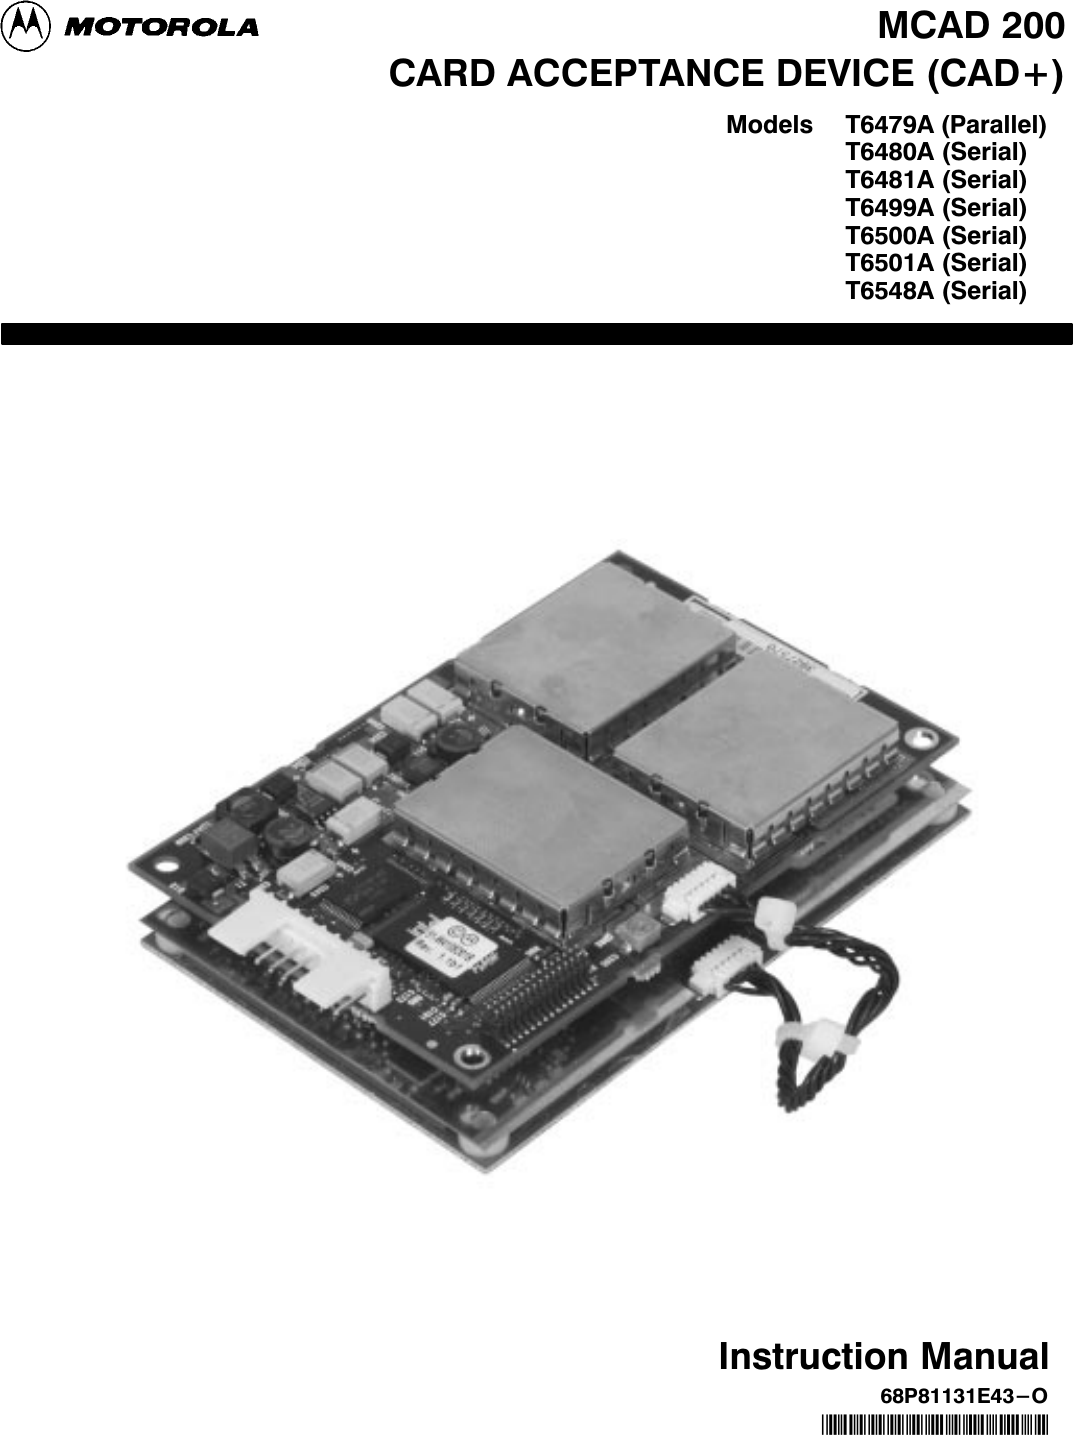 CARD ACCEPTANCE DEVICE (CAD+)T6479A (Parallel)T6480A (Serial)T6481A (Serial)T6499A (Serial)T6500A (Serial)T6501A (Serial)T6548A (Serial)ModelsMCAD 200Instruction Manual68P81131E43-O*6881131e43*